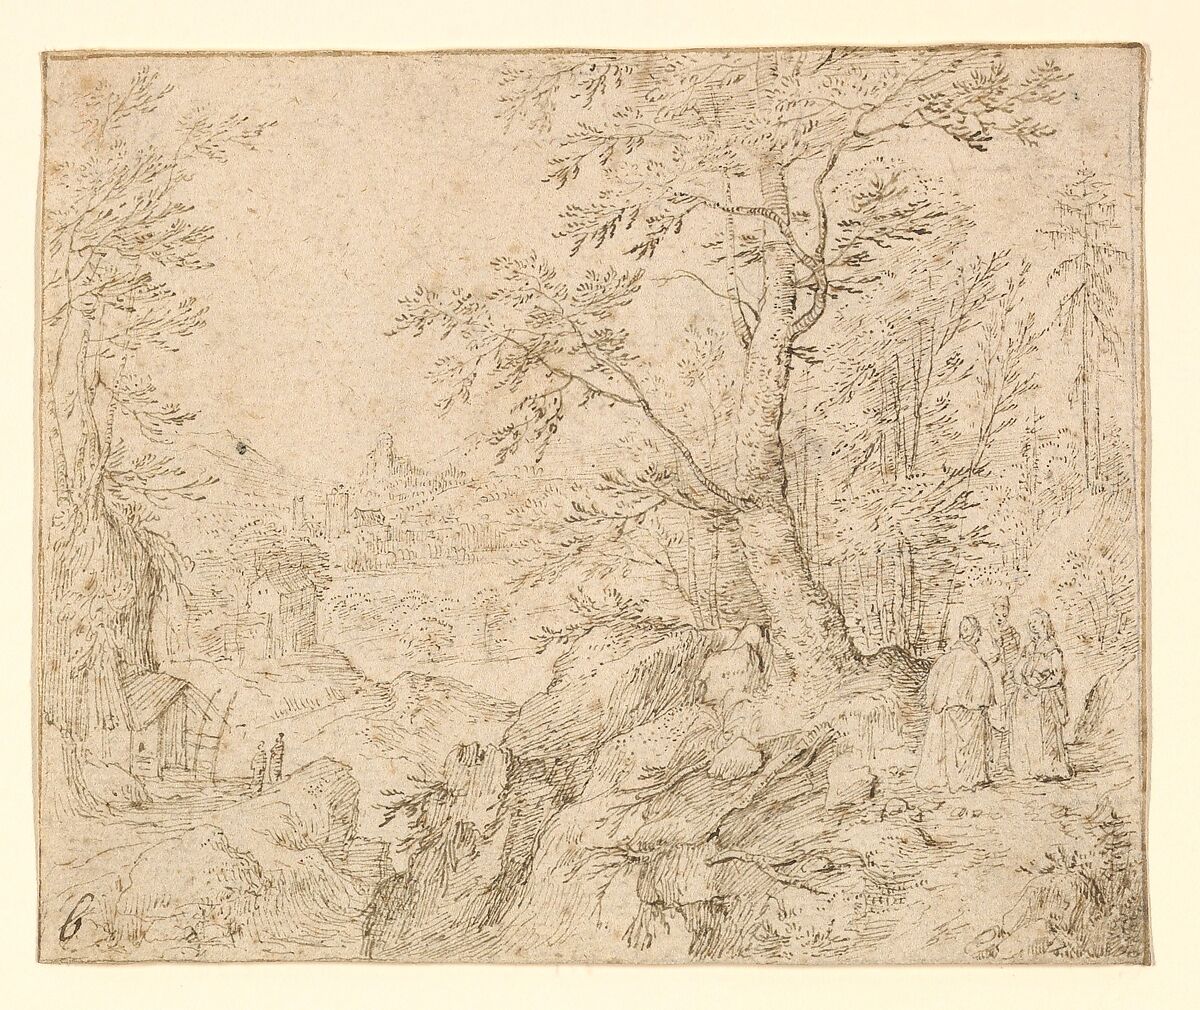 Rugged Wooded River Landscape with Travellers on a Road and a Town Beyond, Philip van den Bossche (Netherlandish, active ca. 1604–15), Pen and brown ink; framing line in pen and brown ink 